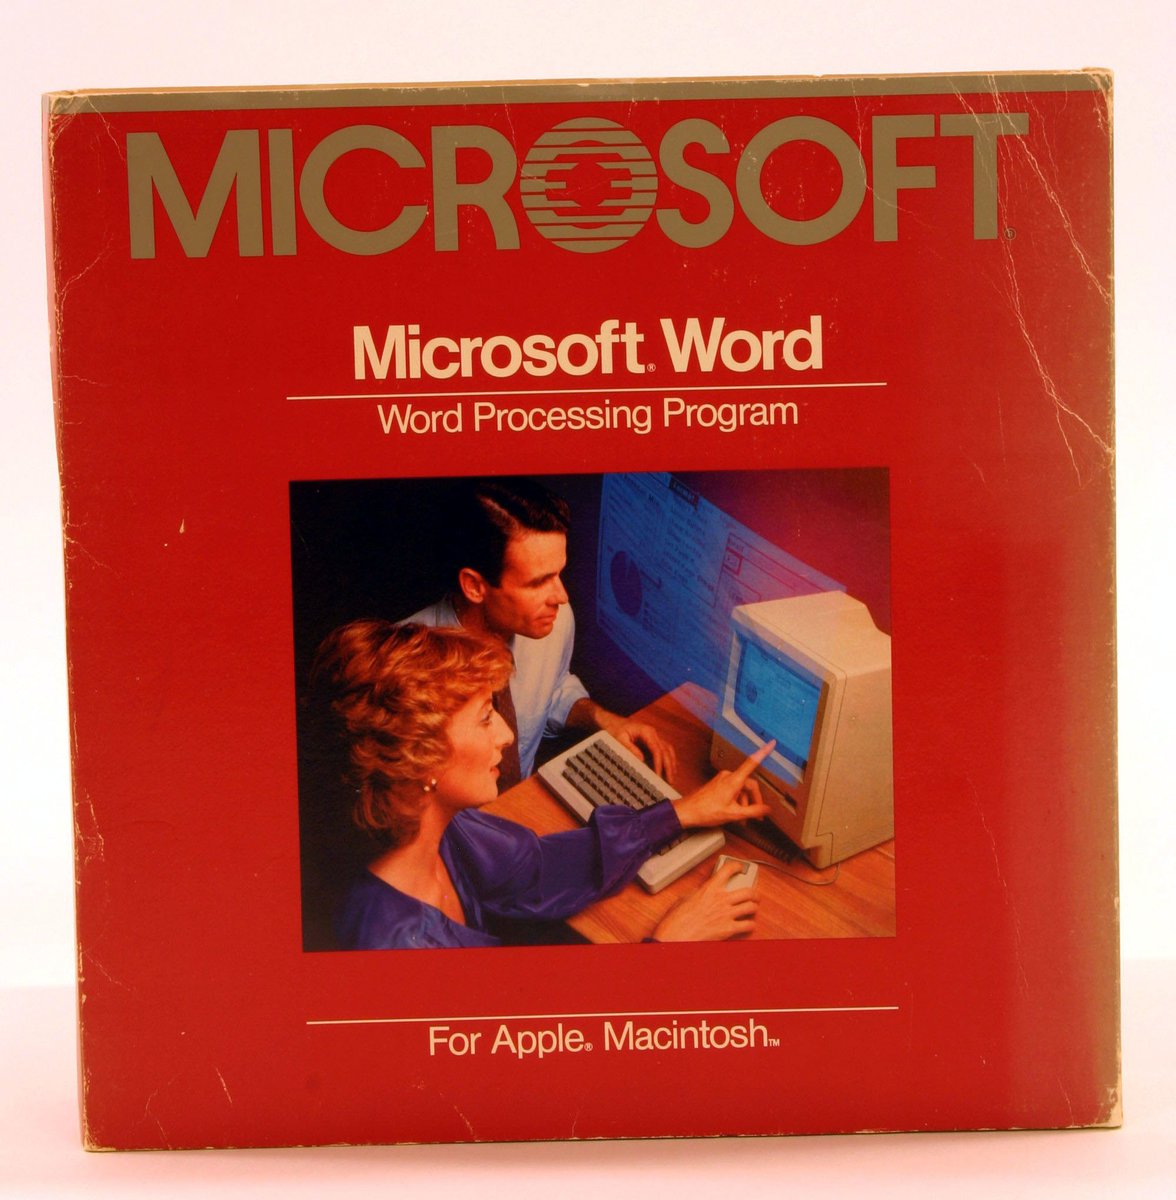 But the eventual champion, as we all know, was Microsoft Word. Launched in 1983 as Multi-Tool Word for Xenix, versions for MS-DOS and Mac were soon released. And it wasn't a bad little package: for the first time you could see line breaks and typeface markups on screen.